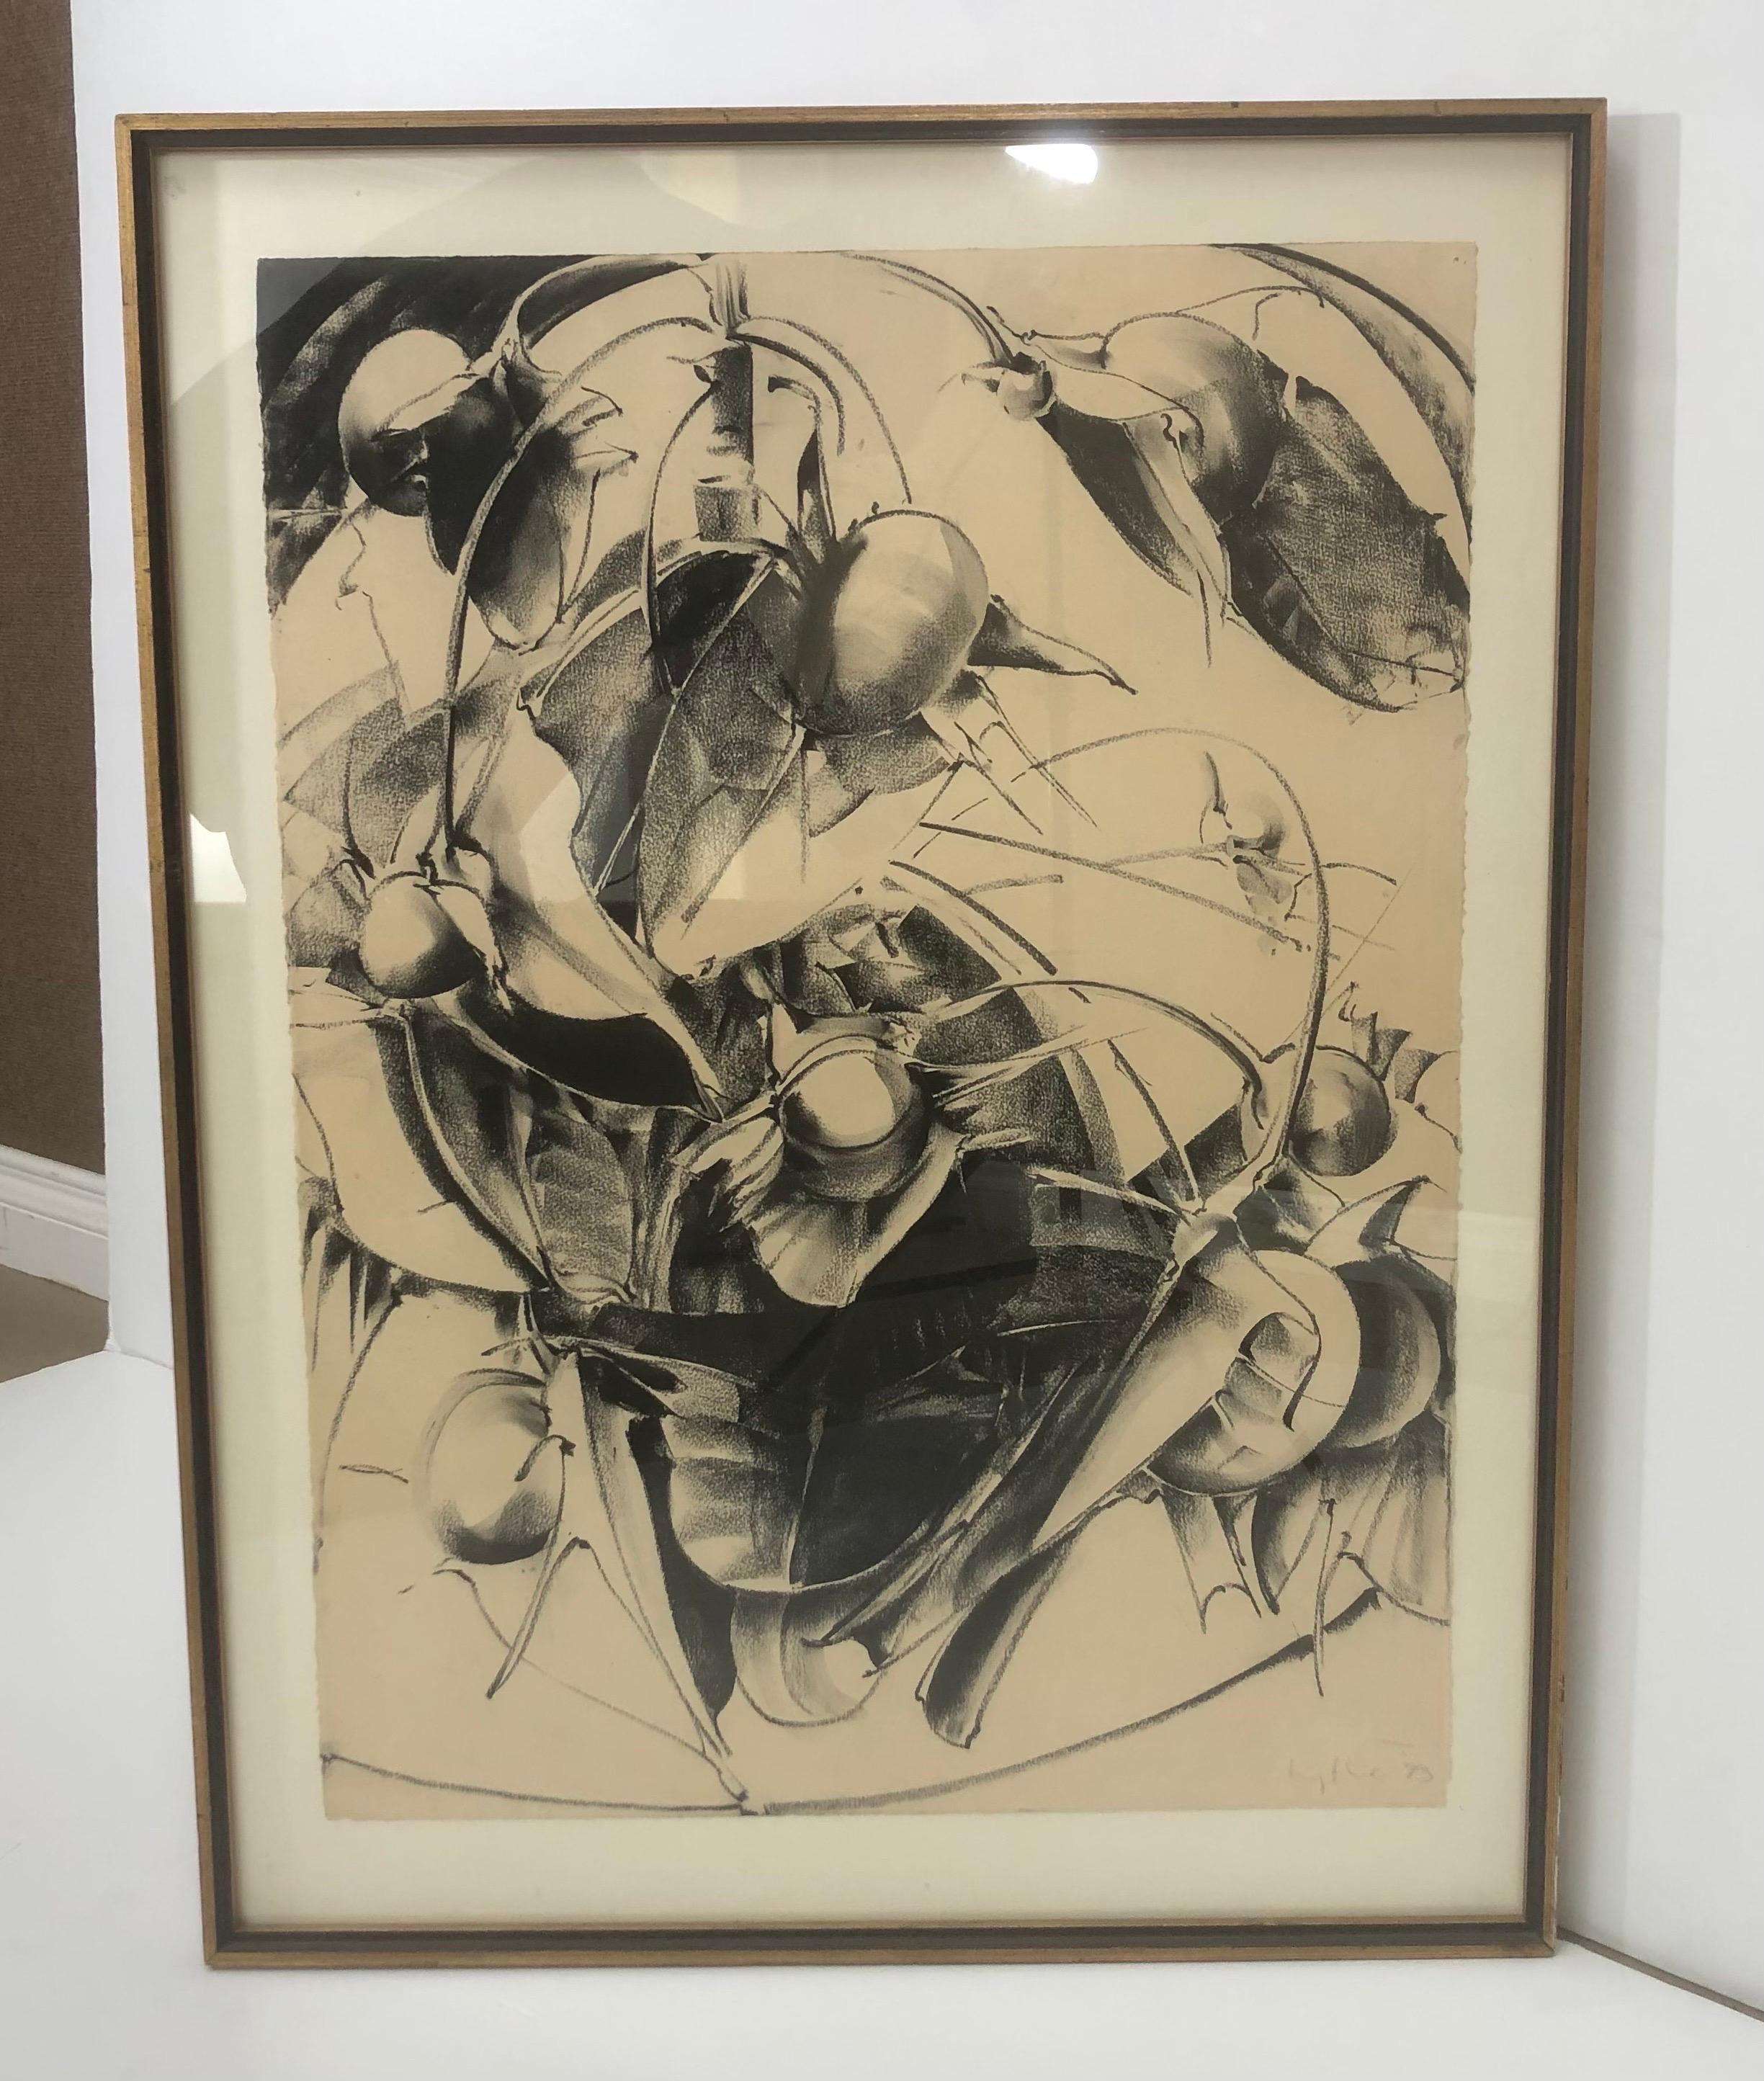 An early “Pod Series” charcoal on paper drawing by Richard Lytle in its original frame from Denby Framing in New Haven Connecticut.
Lytle was among the Sixteen Americans featured in the 1959-1960 MOMA exhibition of the same name curated by Dorothy